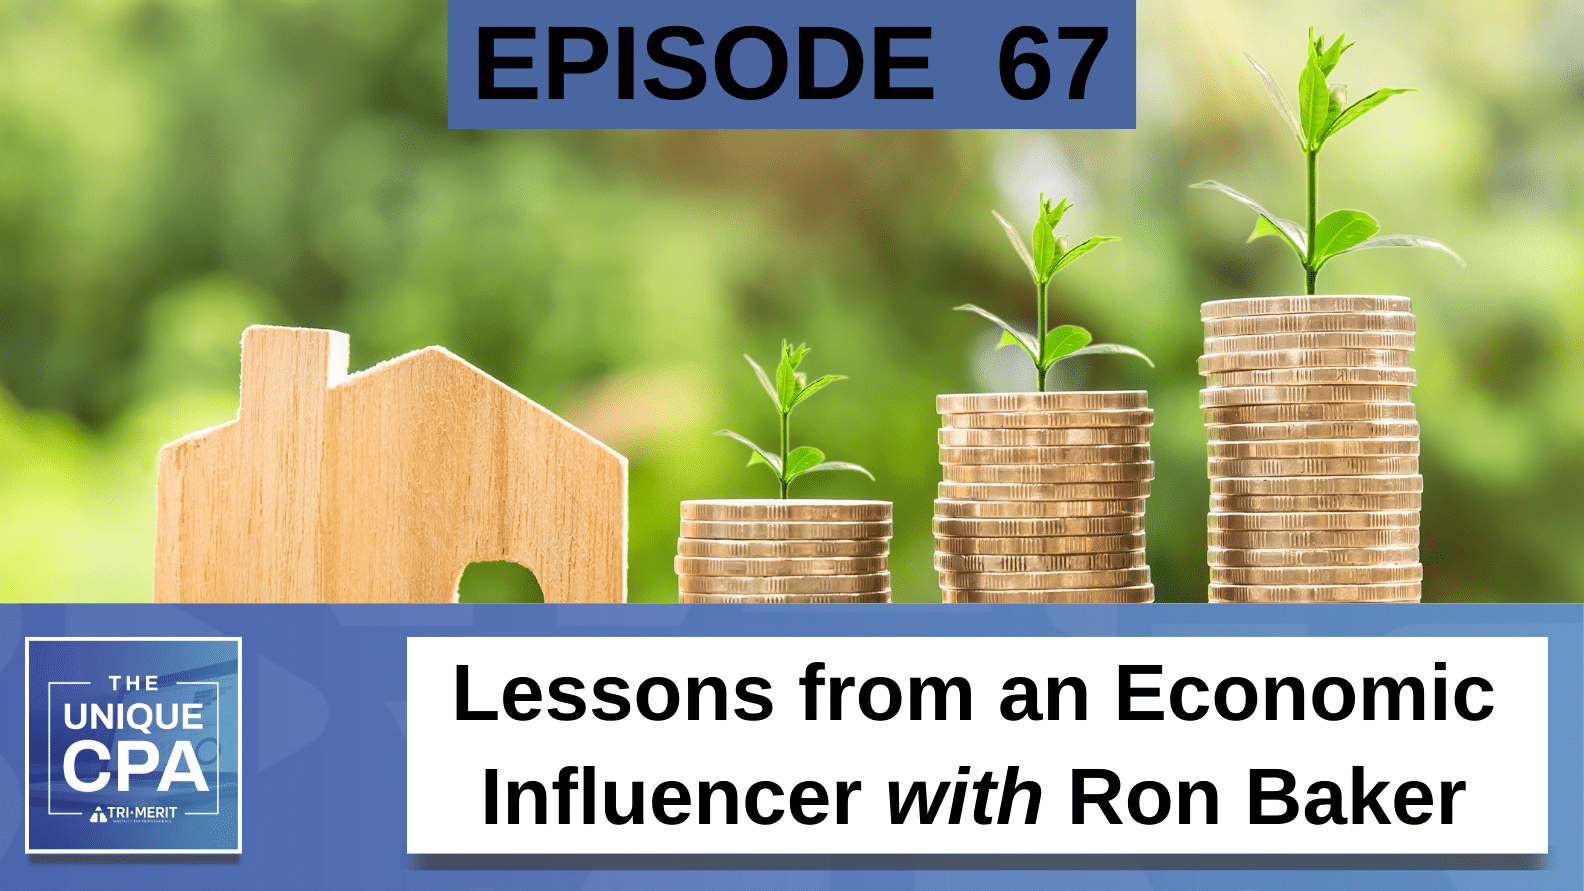 Unique Cpa Featured Image Ep 67 Ron Baker - Lessons From An Economic Influencer - Tri-Merit